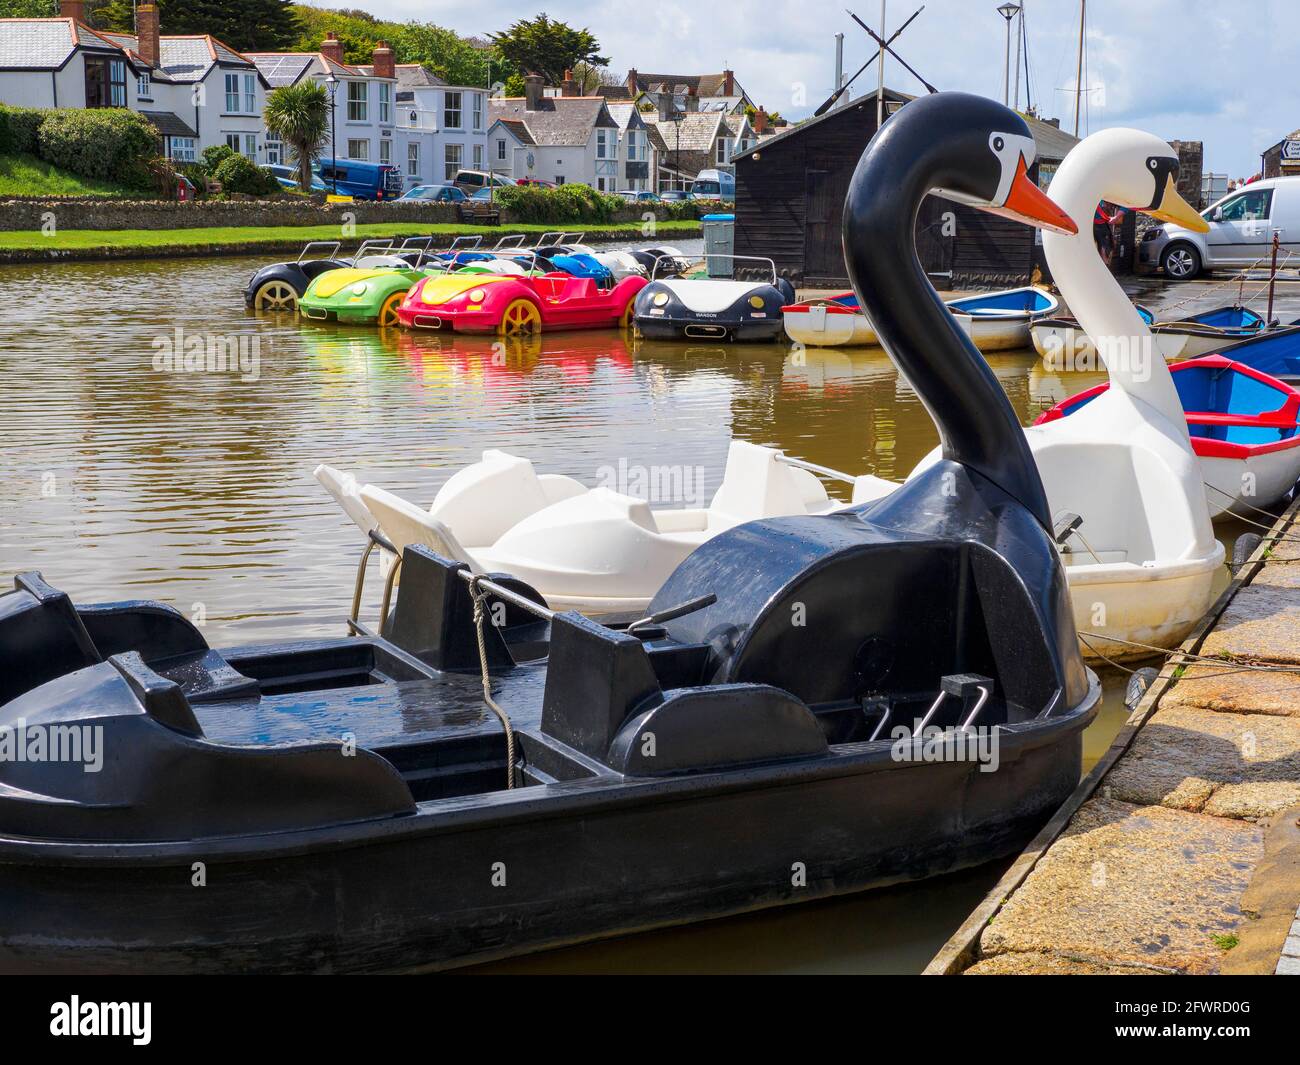 Pedalos on the canal, Bude, Cornwall, UK Stock Photo